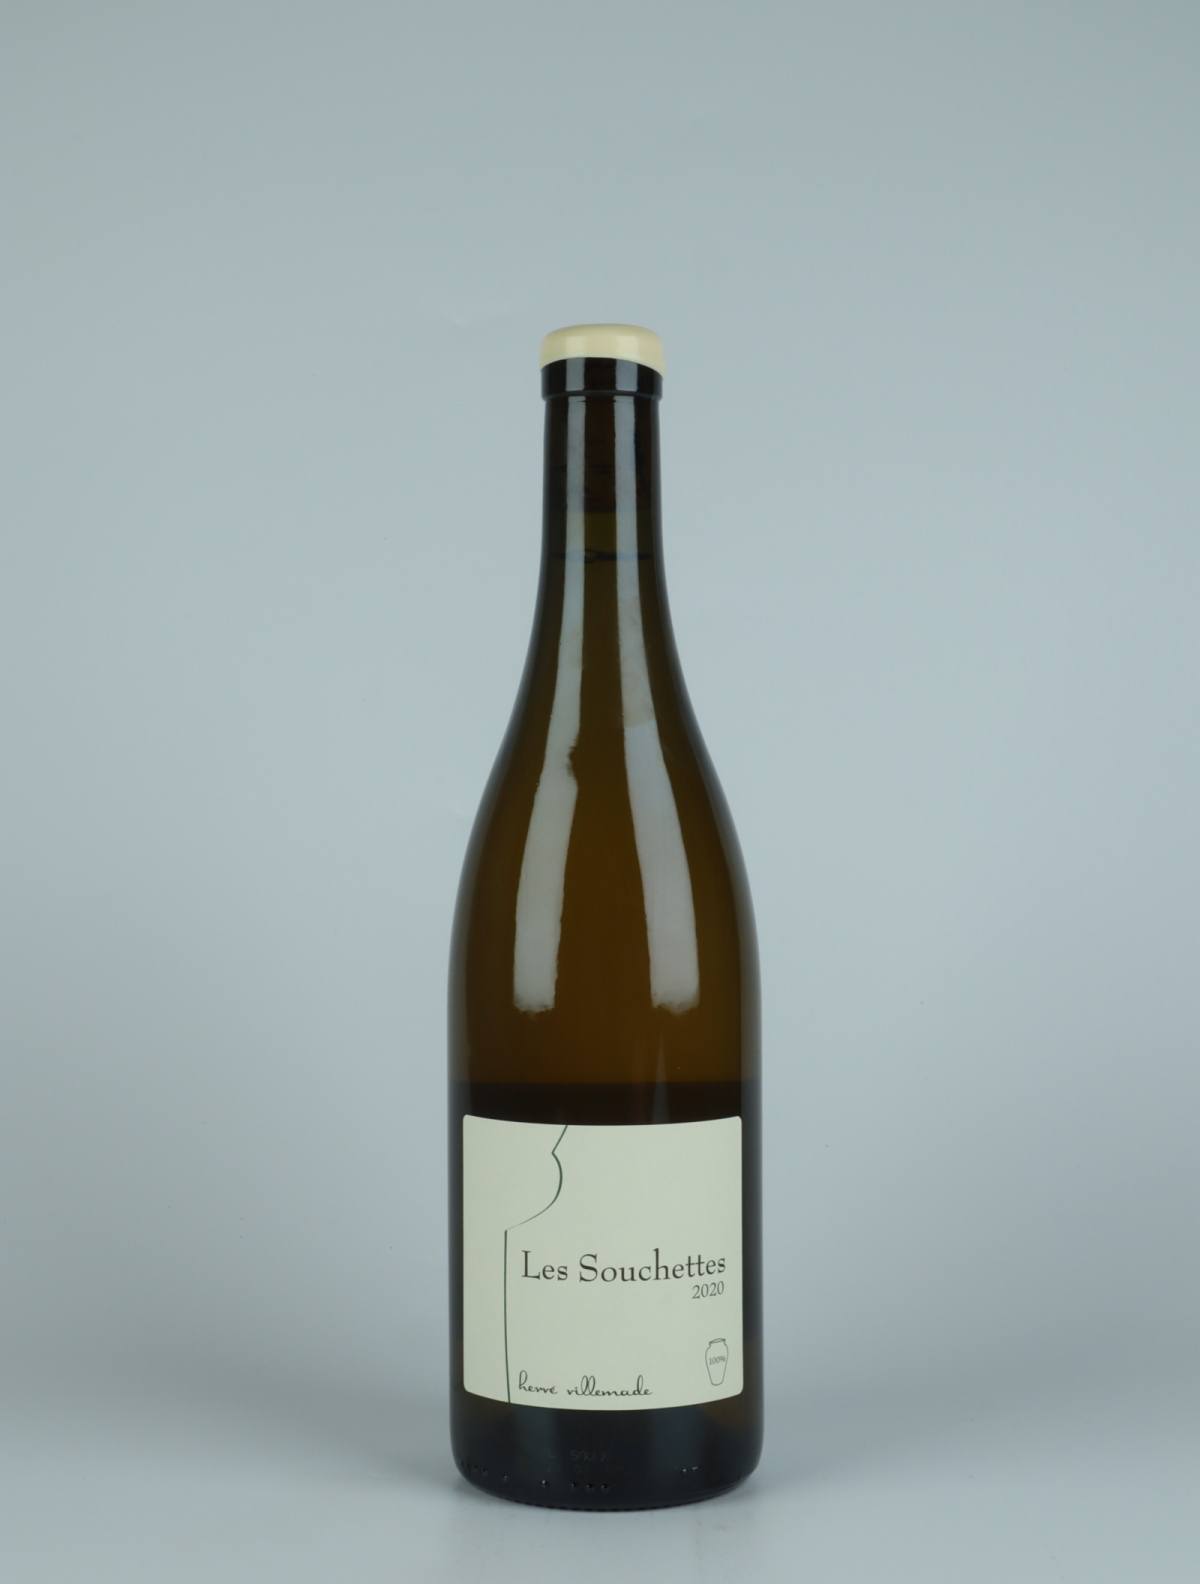 A bottle 2020 Les Souchettes White wine from , Loire in France